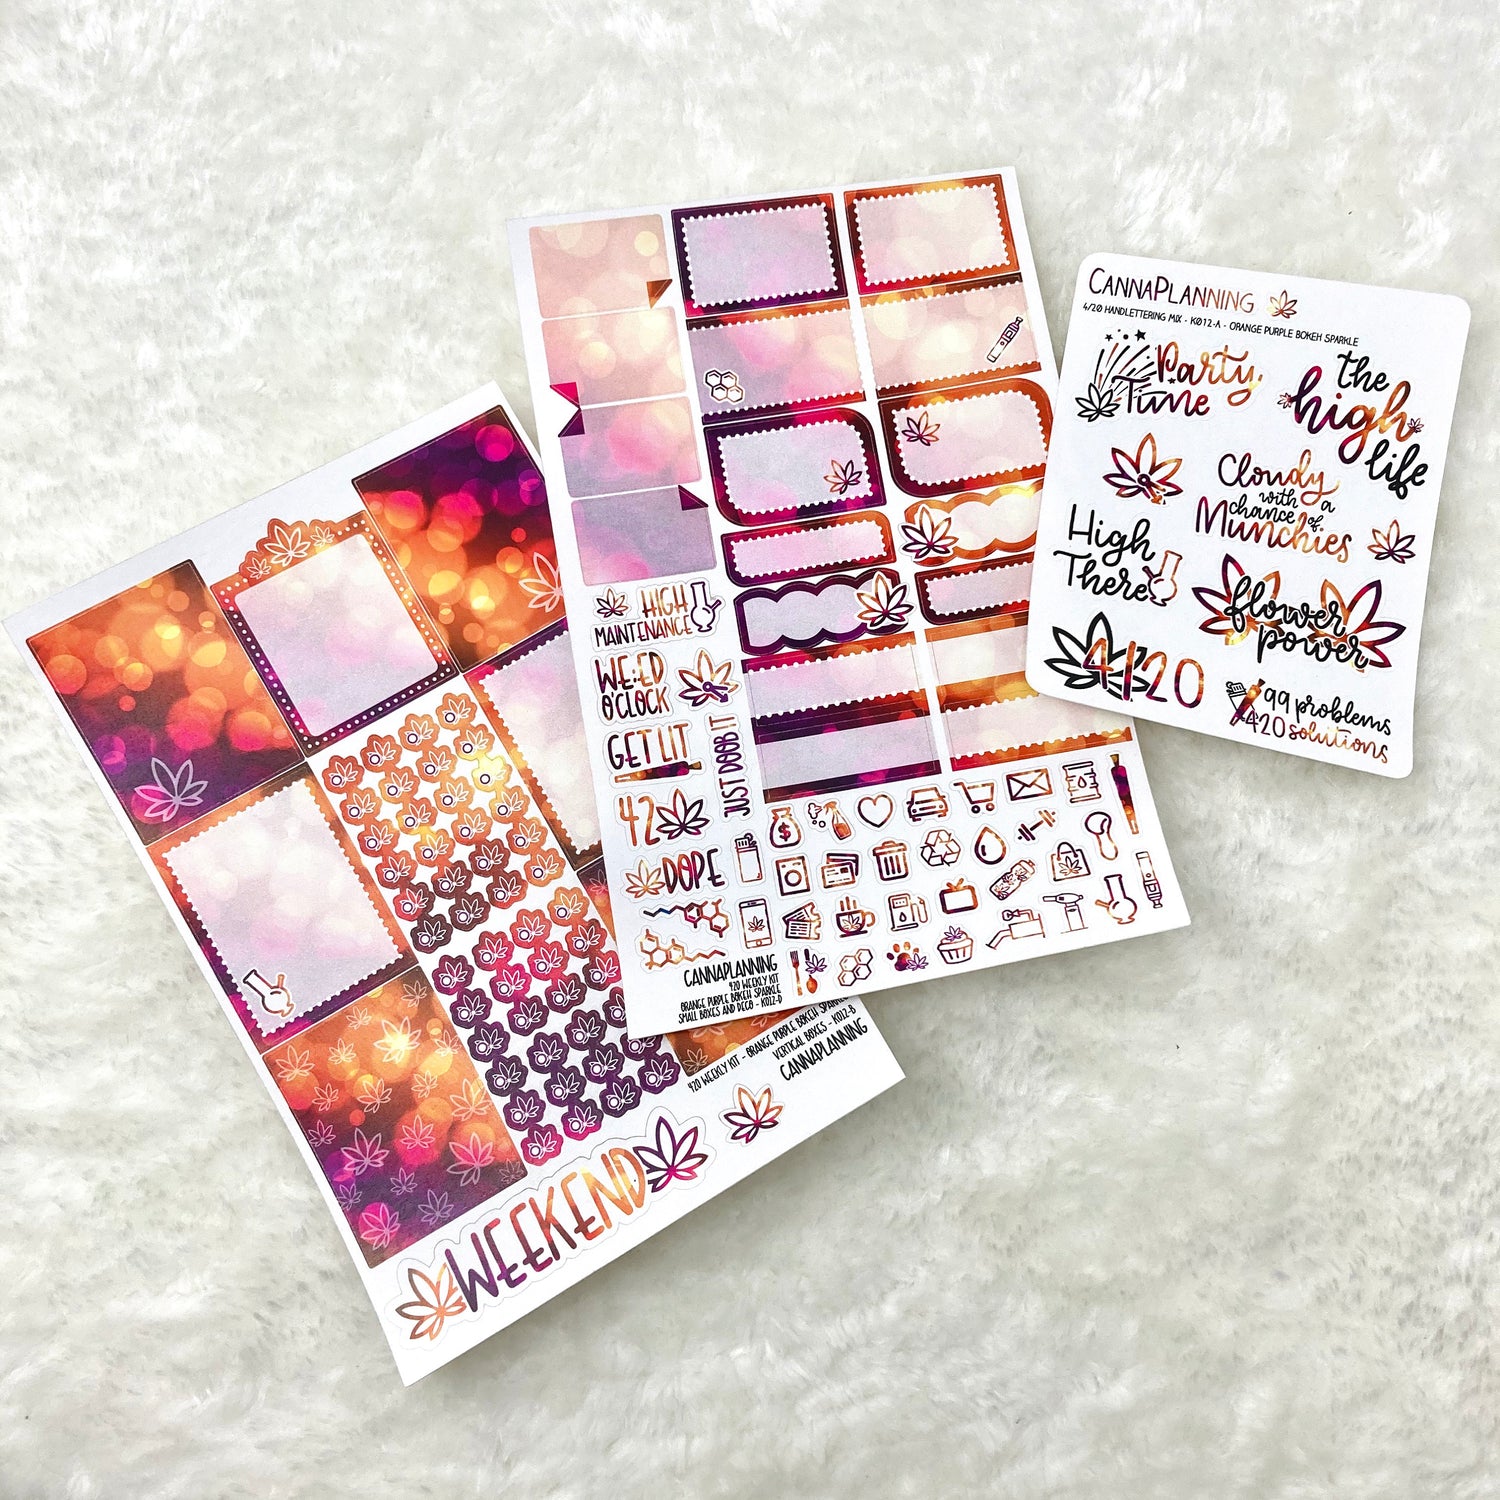 420 Weekly Sticker Kit - VERTICAL AND HORIZONTAL - Orange Purple Bokeh Sparkle | weed and cannabis planner sticker kit and scrapbook (6596138598577)